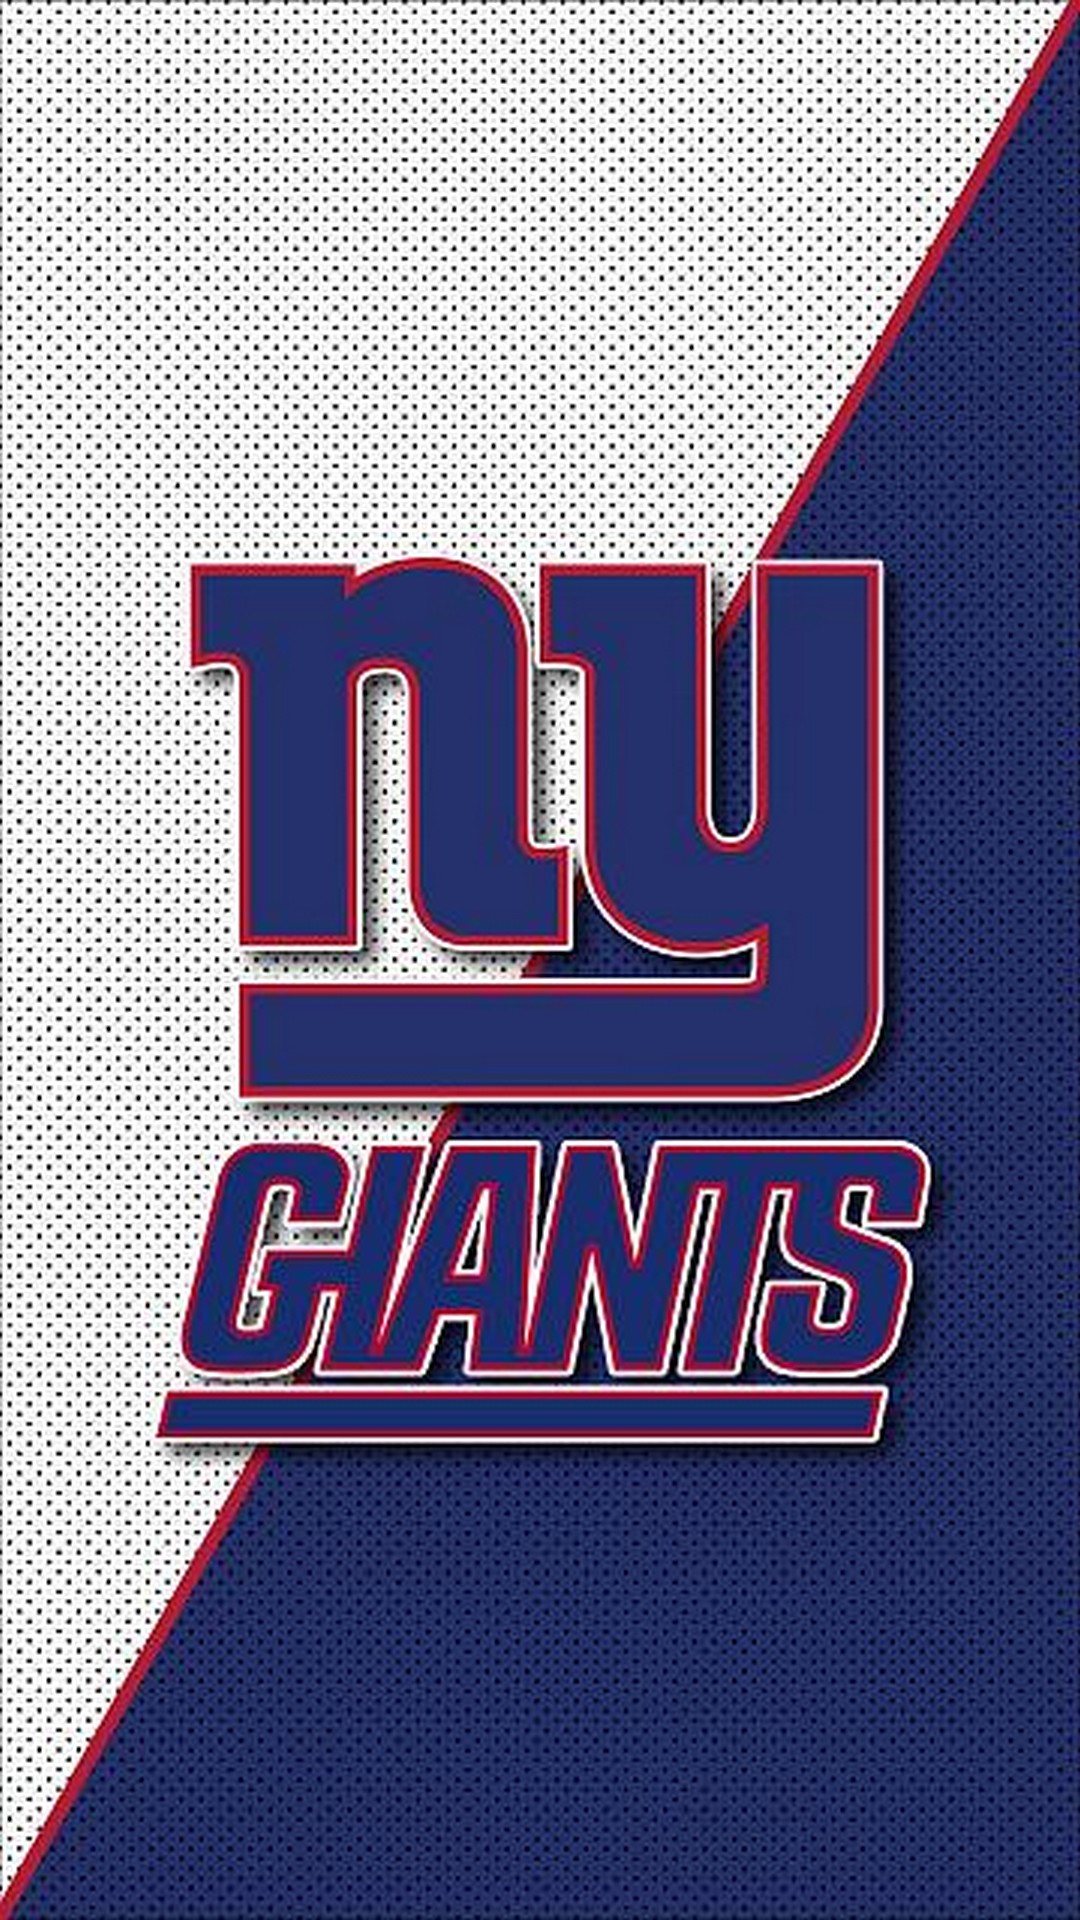 New York Giants iPhone XS Wallpaper with high-resolution 1080x1920 pixel. Download and set as wallpaper for Desktop Computer, Apple iPhone X, XS Max, XR, 8, 7, 6, SE, iPad, Android